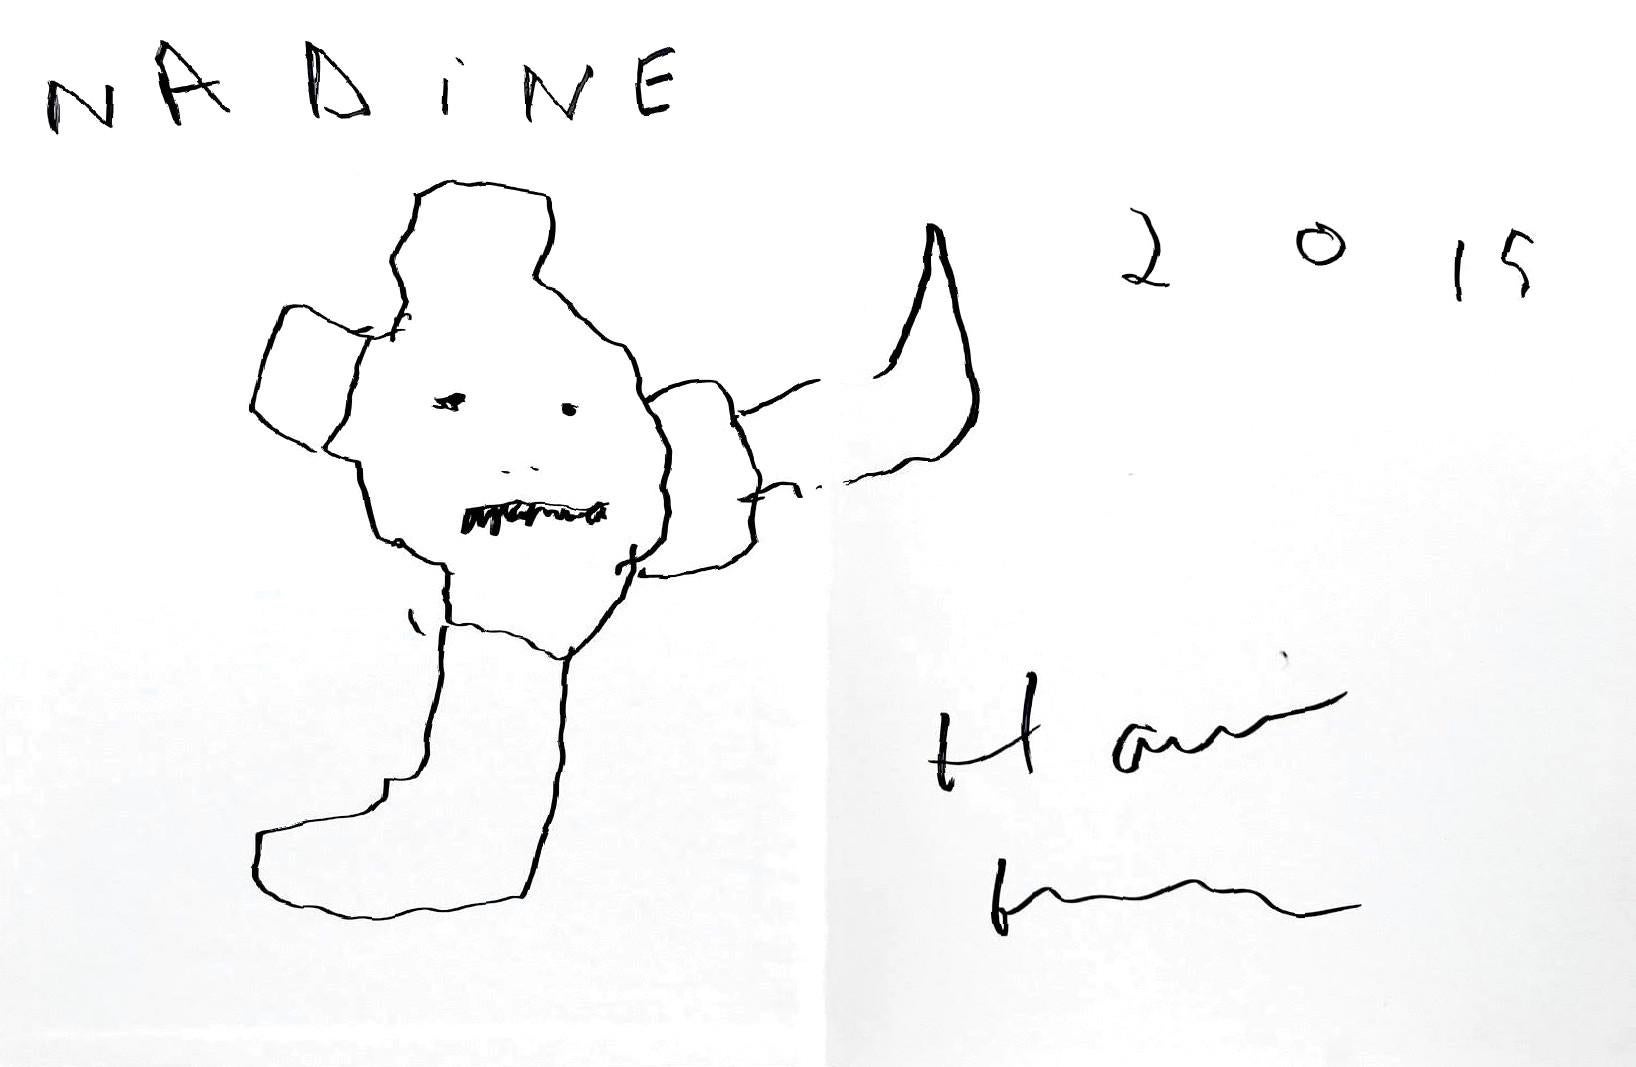 Original Drawing (Hand signed and inscribed to Nadine)